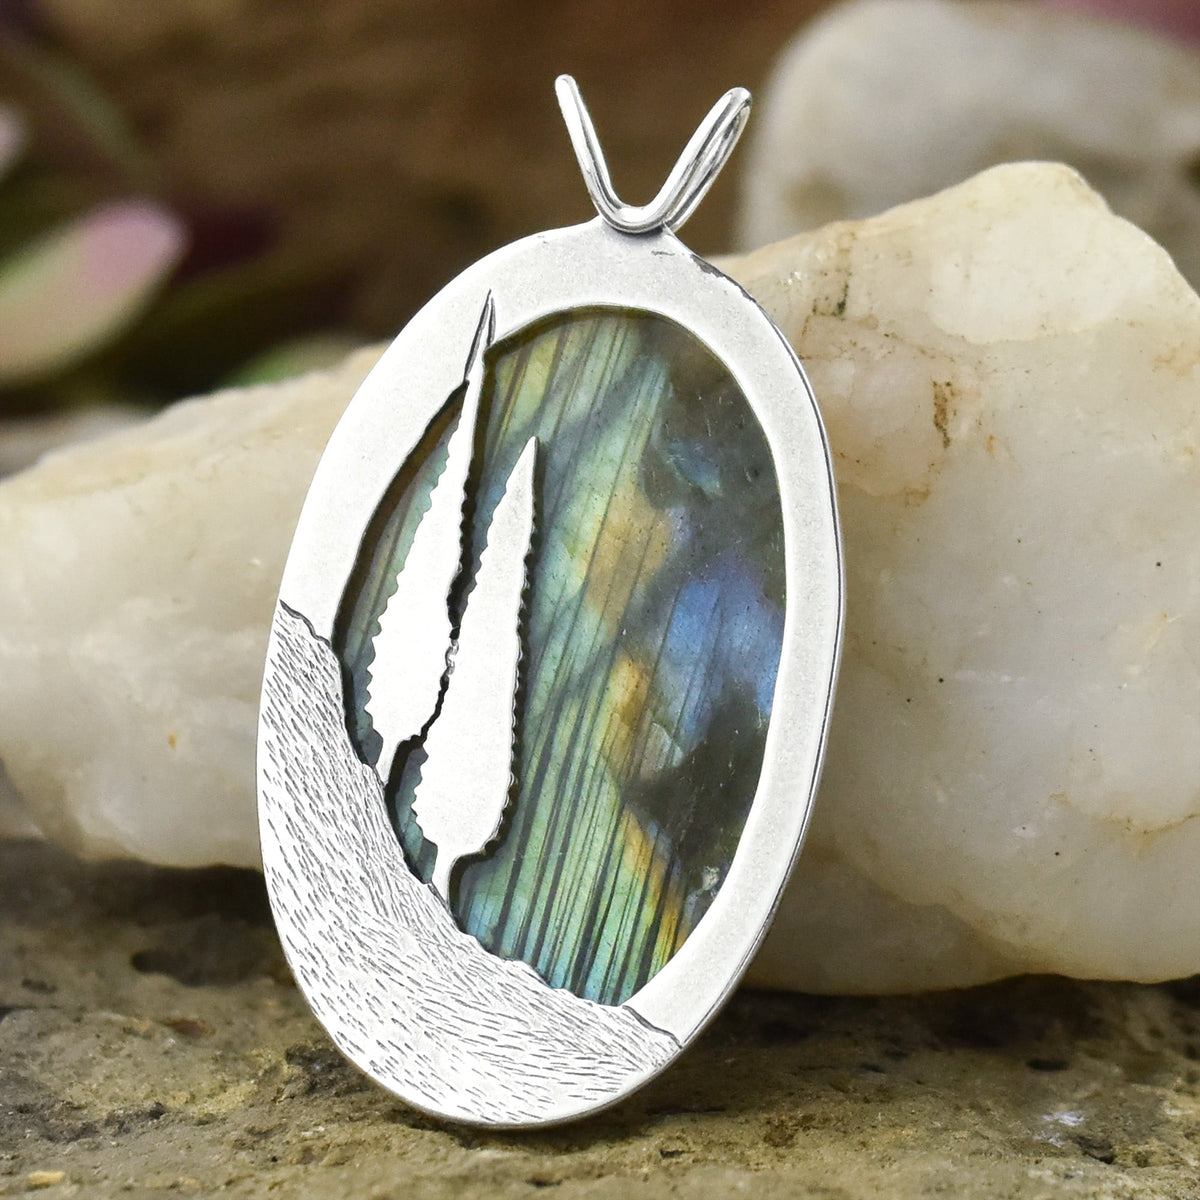 Choose Your Own Stone Reversible Oval Northern Lights Pendant - Silver Pendant Stone A - 30 x 21mm Stone B - 26 x 17mm 6910 - handmade by Beth Millner Jewelry